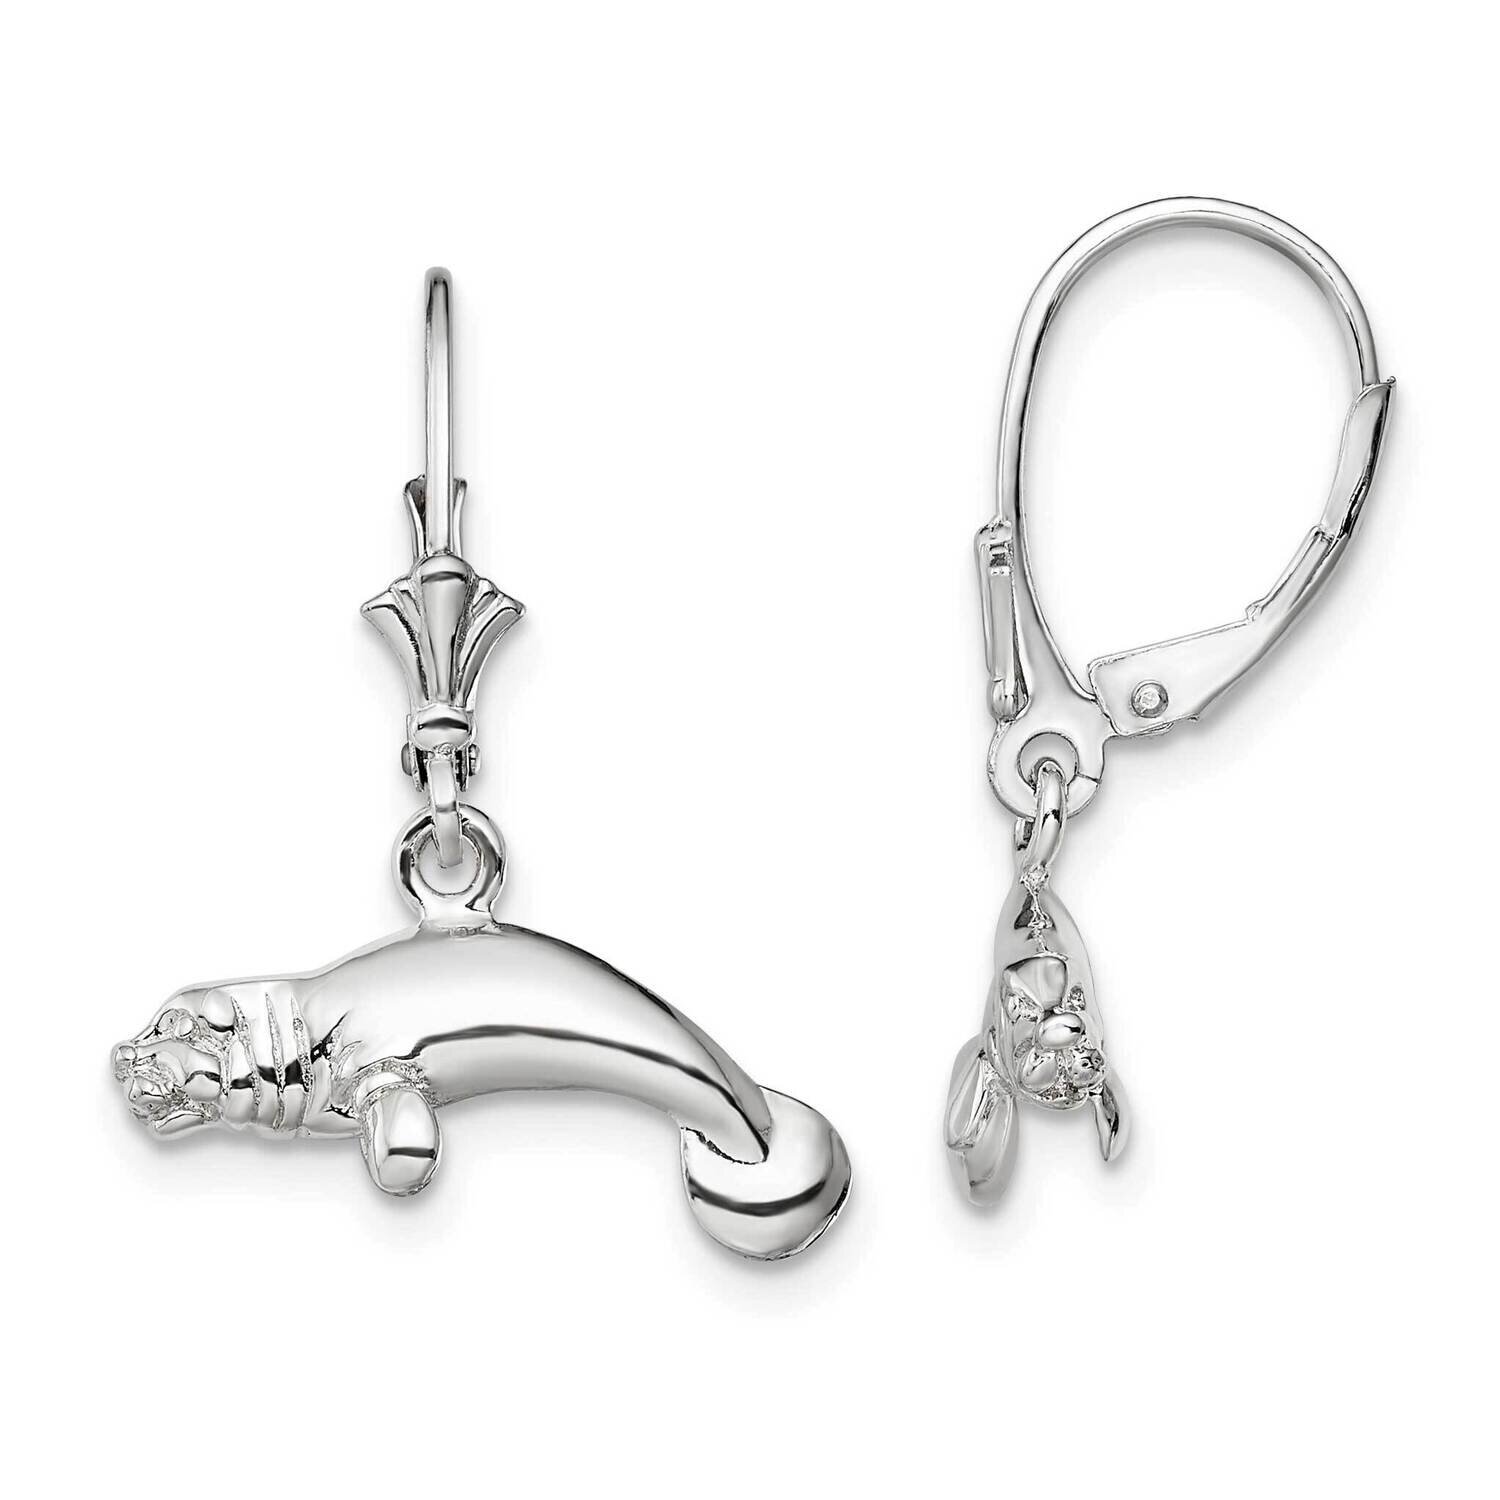 3D Manatee Leverback Earrings Sterling Silver Polished QE15583